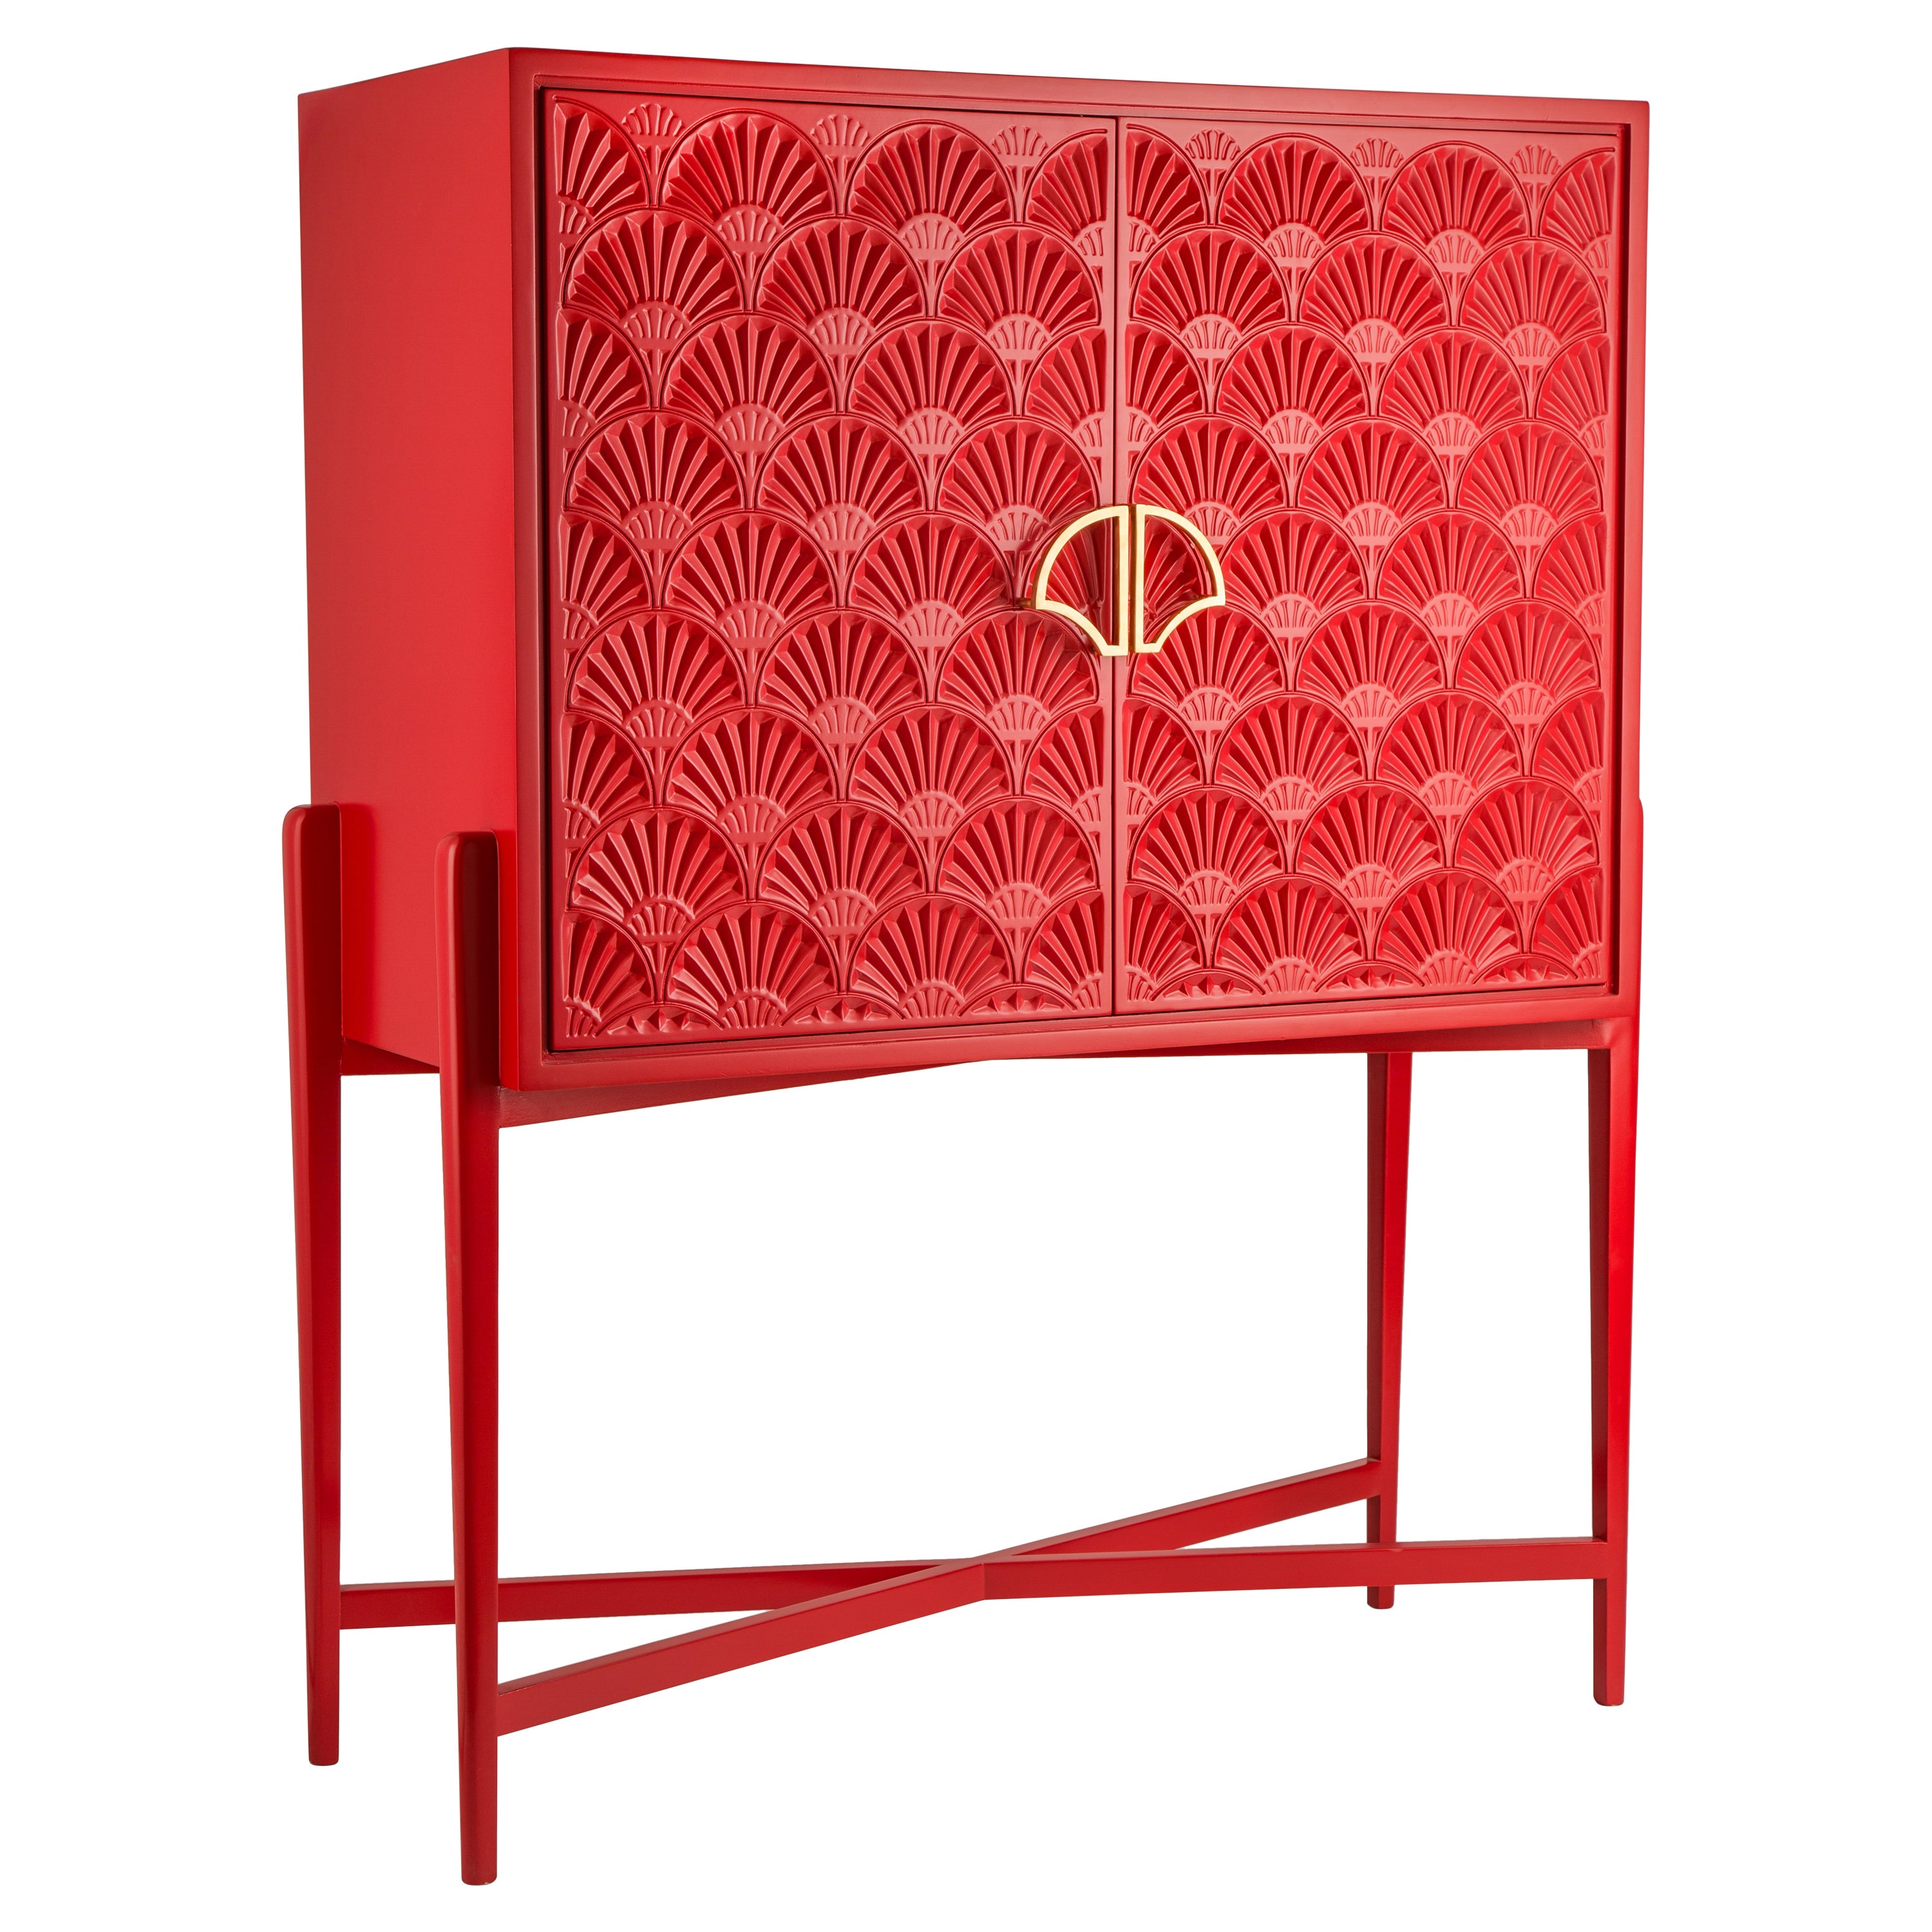 Red Lacquered Cocktail Cabinet with Carved Lotus Motif and Brass Lotus Handle